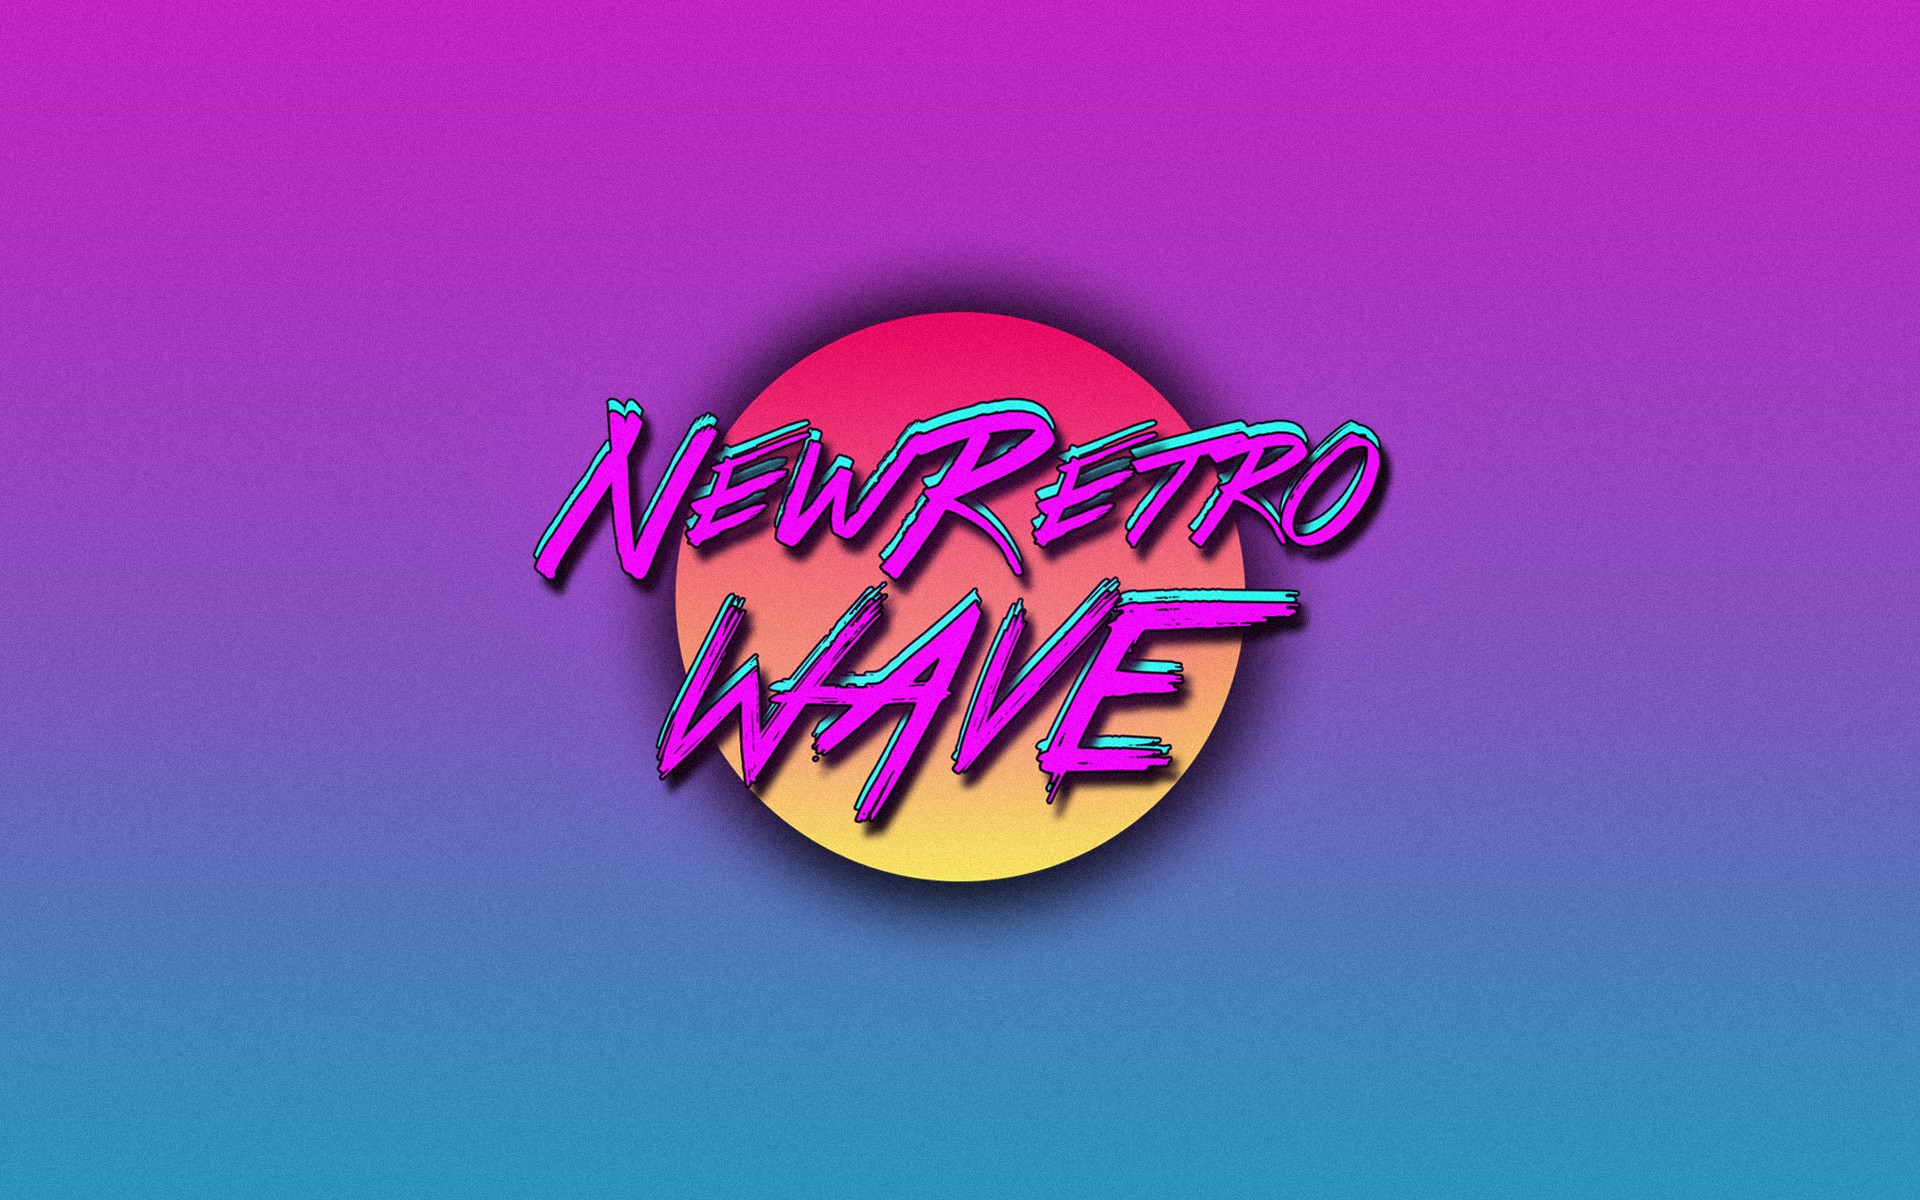 New Retro Wave Vintage Synthwave Neon 1980s Retro Games Digital Art Simple Background Typography 1920x1200